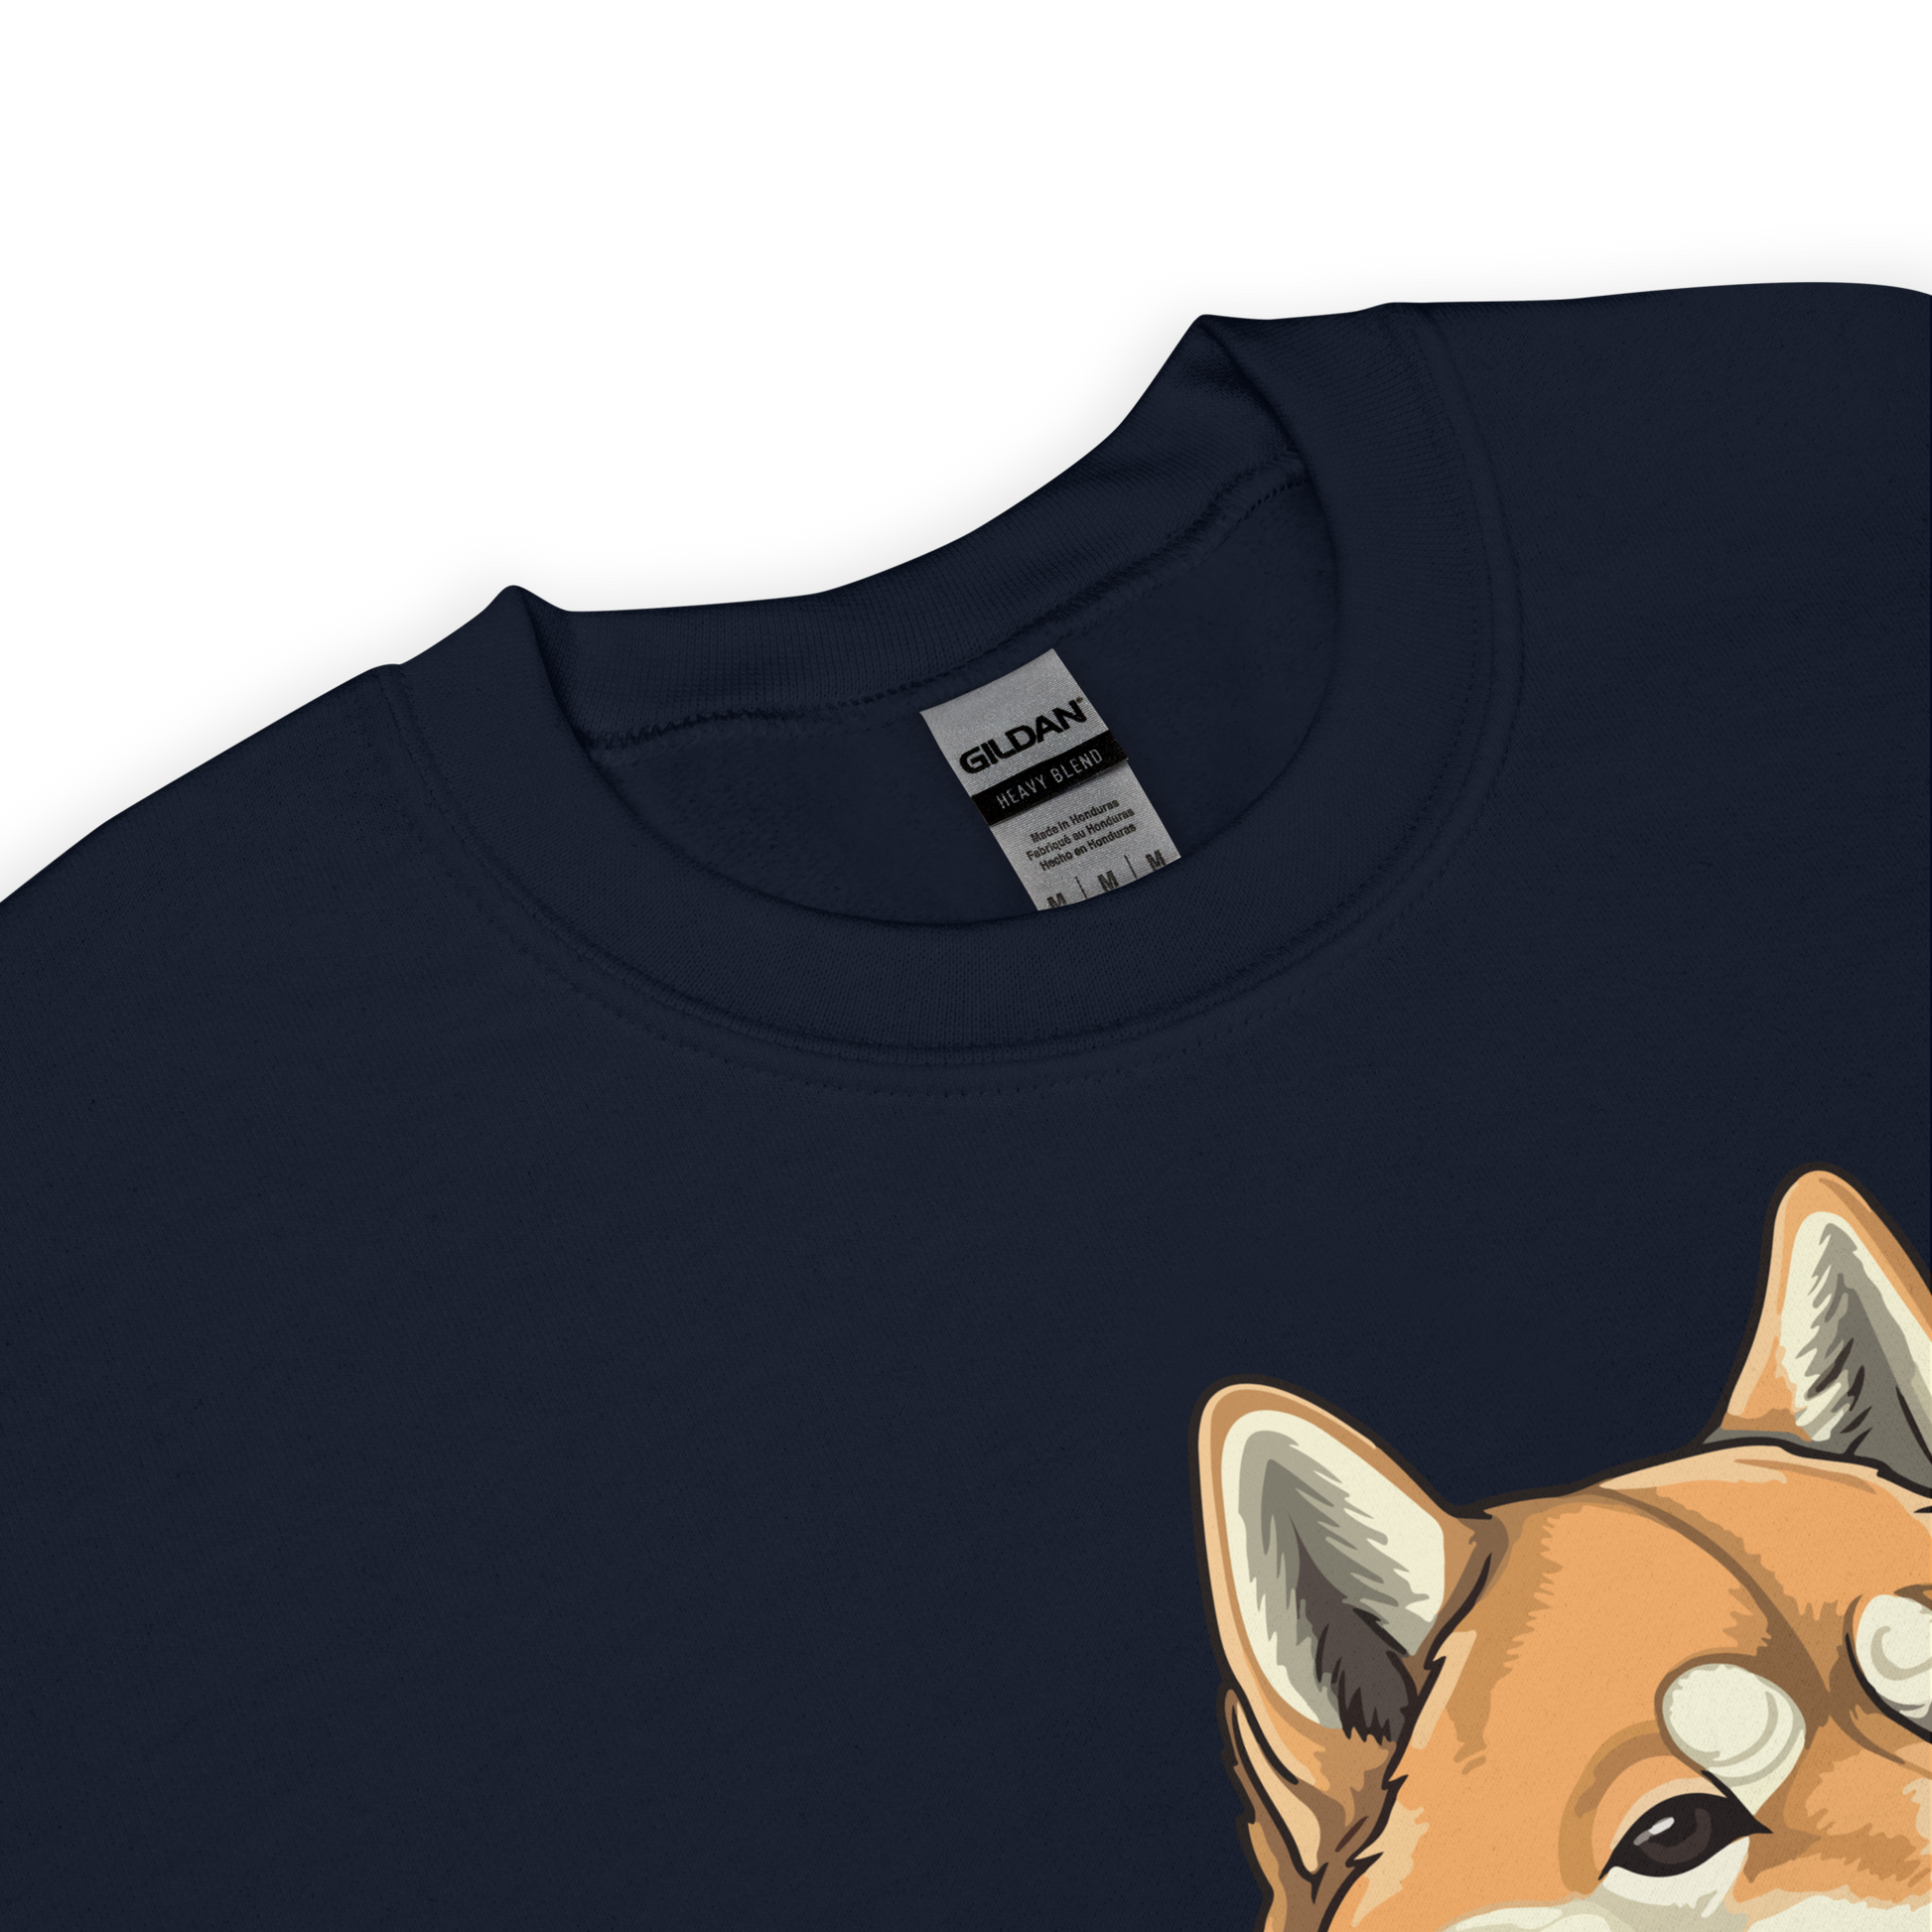 Product details of a Navy Shiba Inu Sweatshirt featuring the Inu-Credible graphic on the chest - Funny Graphic Shiba Inu Sweatshirts - Boozy Fox